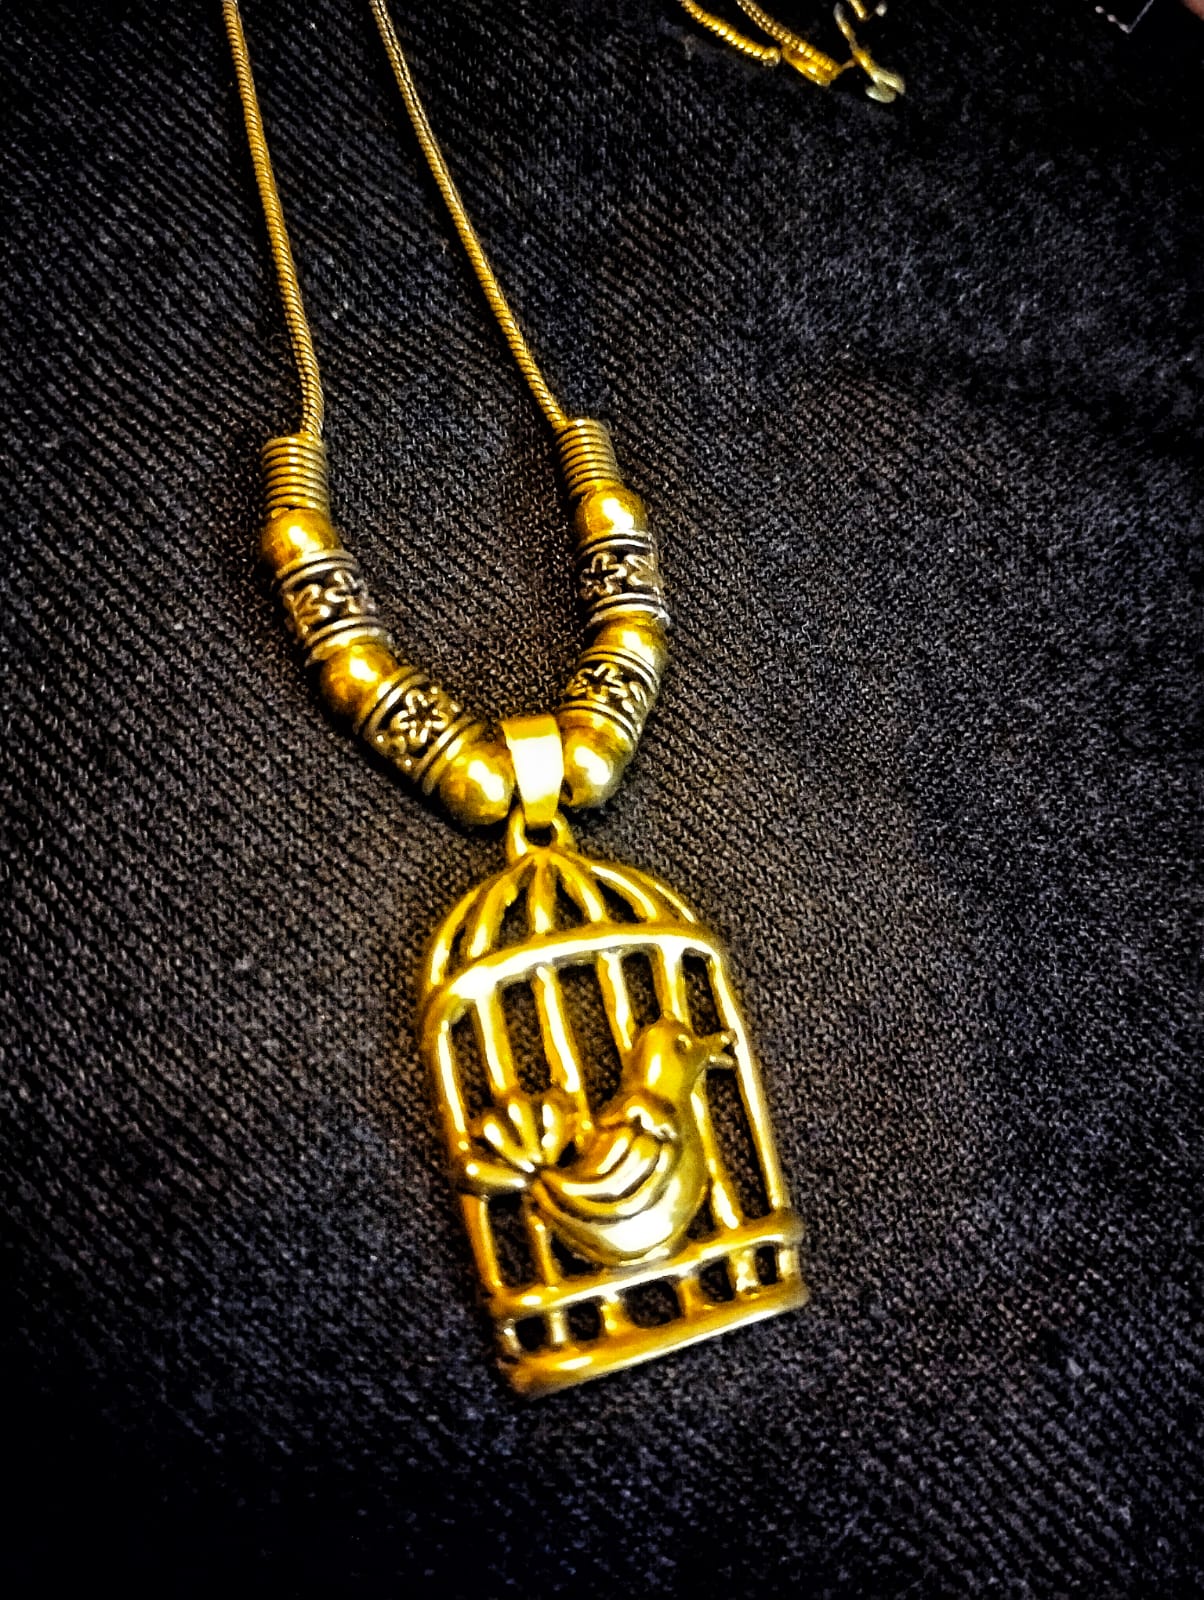 Oxidized Golden Maala Pendant: A captivating golden pendant with an oxidized finish, featuring an intricate cage-style design and a delicate bird motif suspended within